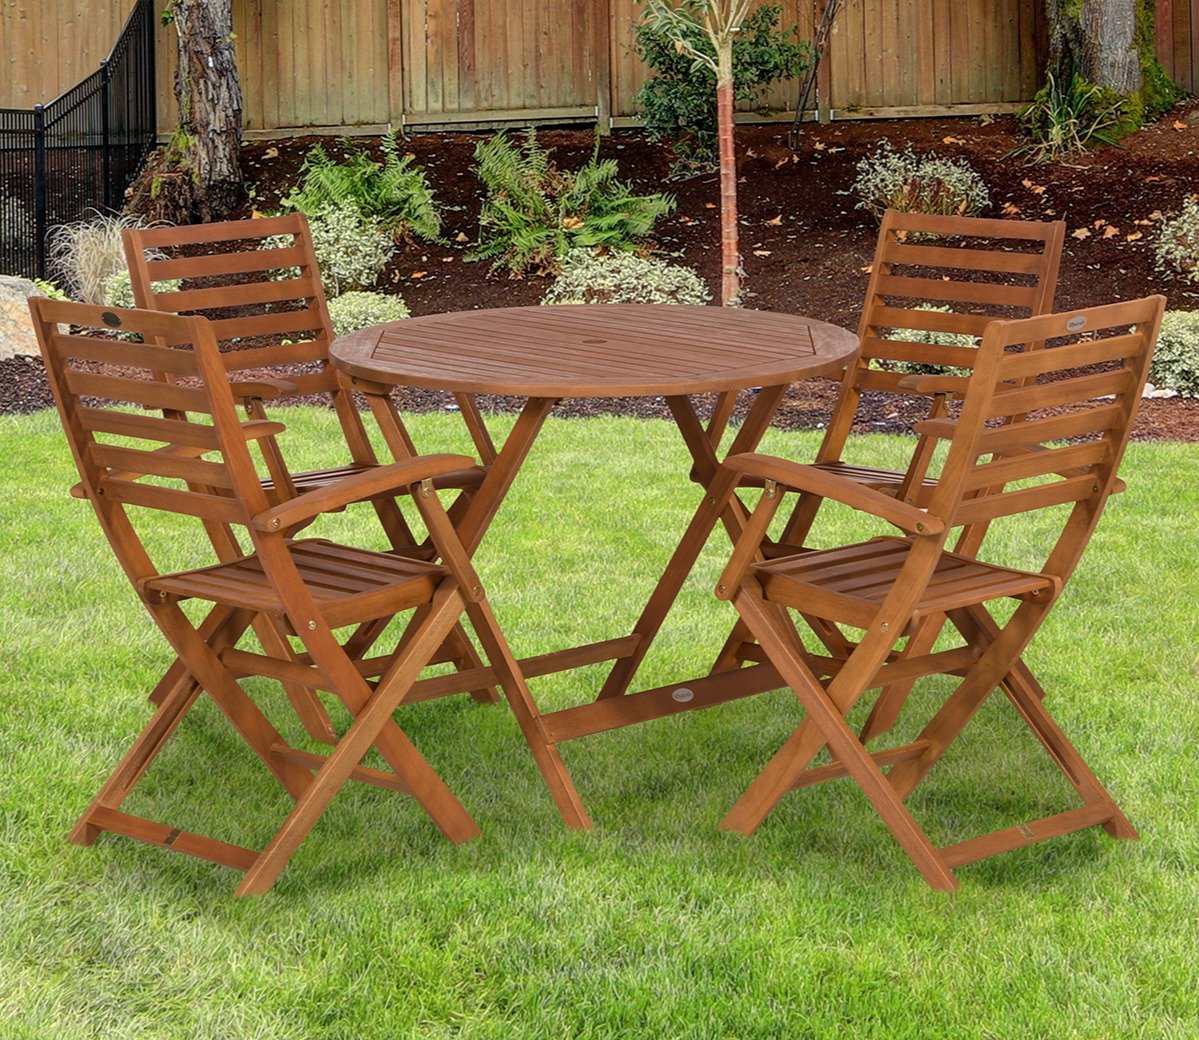 Royalcraft Royal Craft folding wooden bistro chairs x 4 